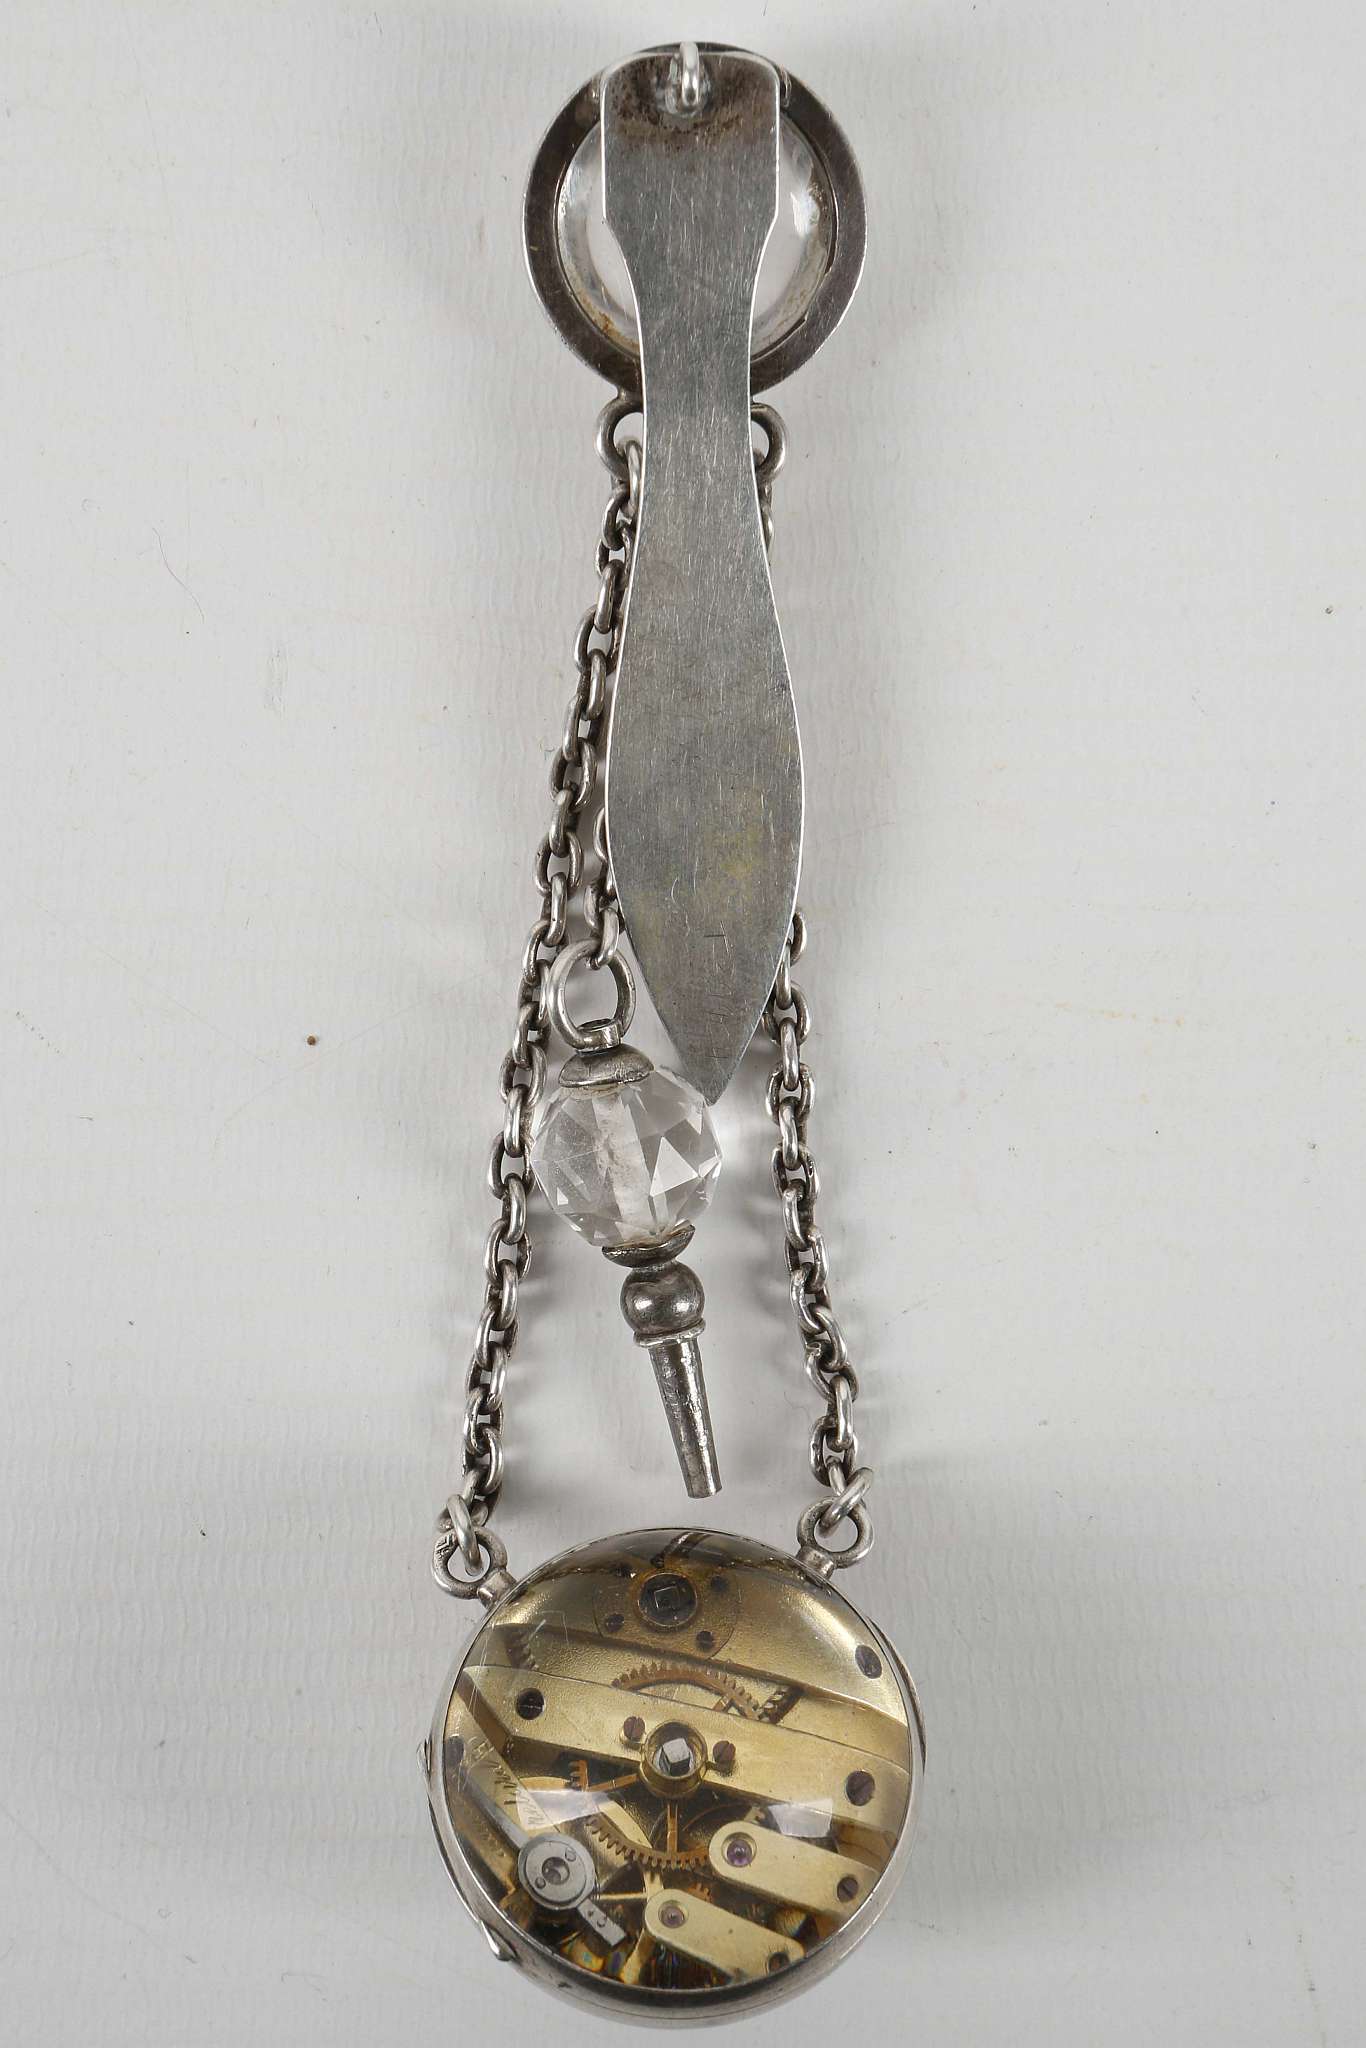 A sterling silver pendant watch on chain with attached clip and key - Image 2 of 2